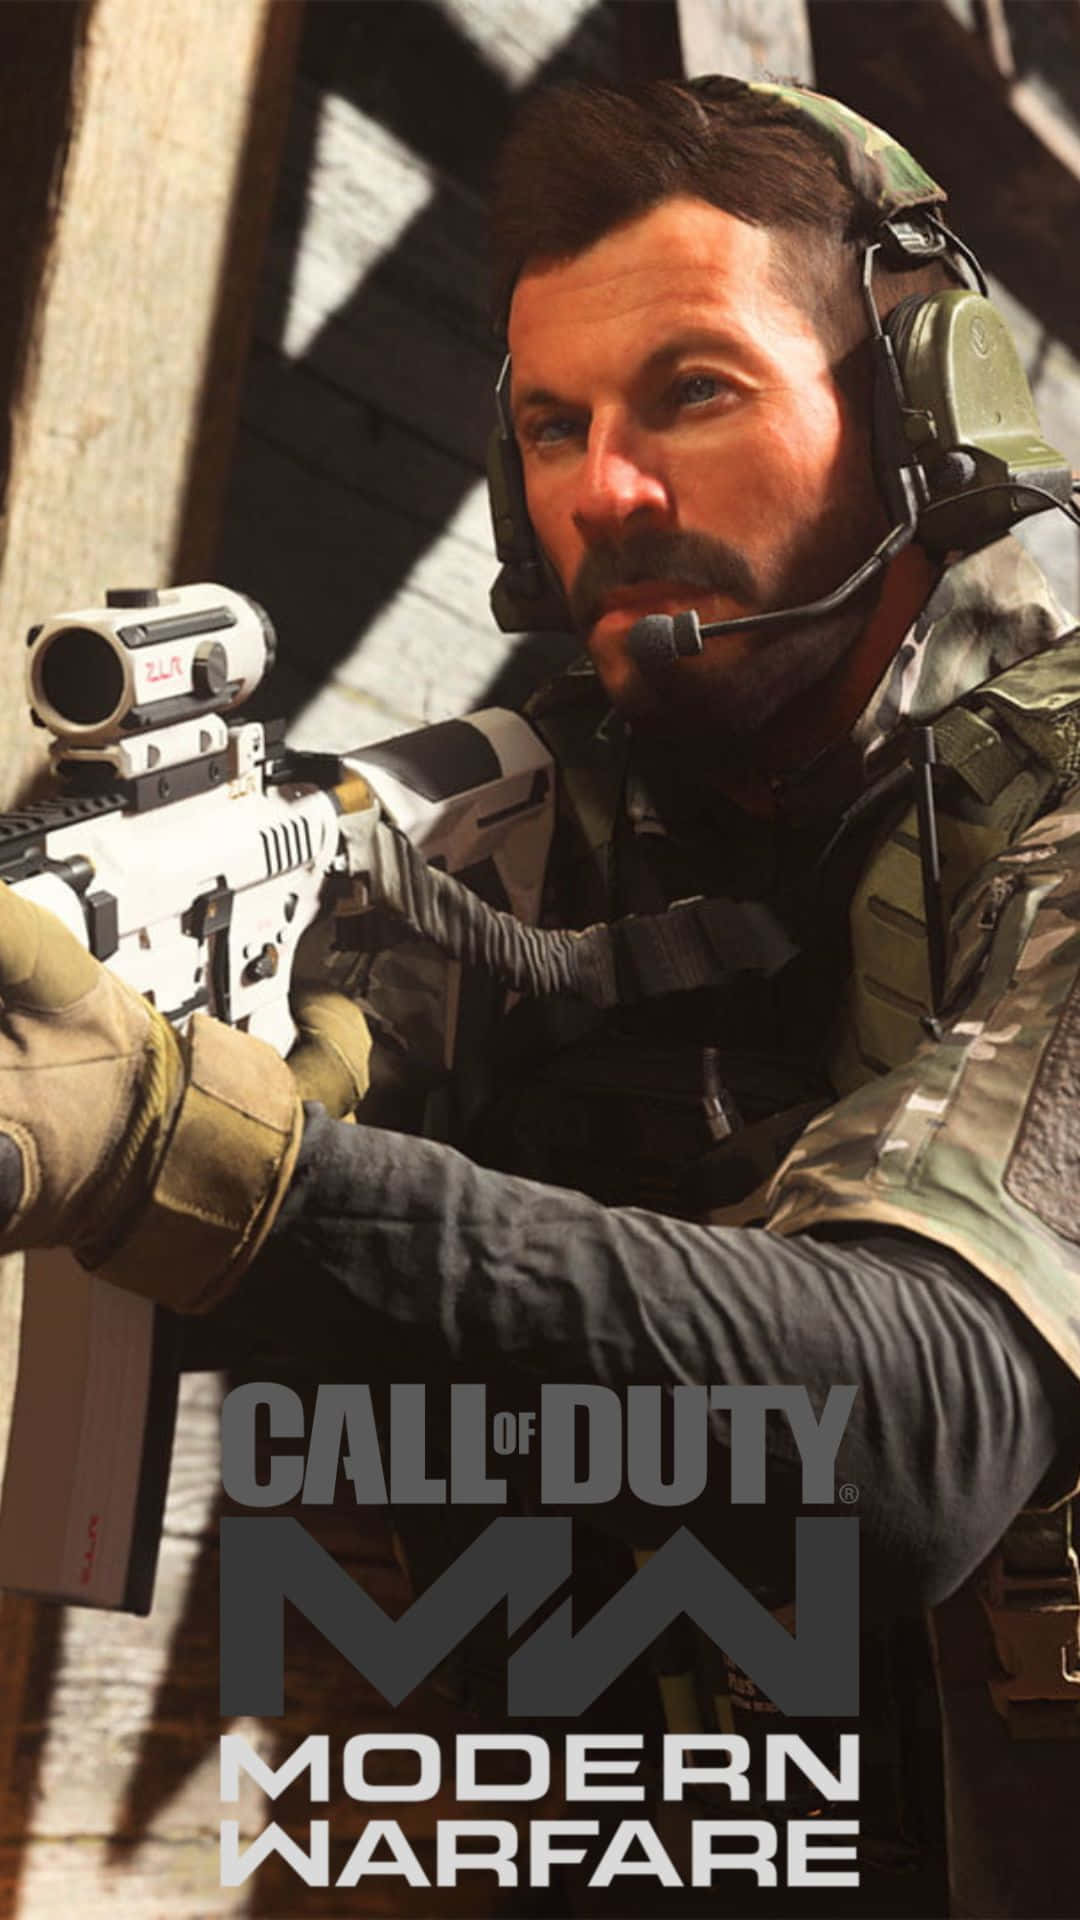 "Outwit Enemies with Android and Call Of Duty Modern Warfare"